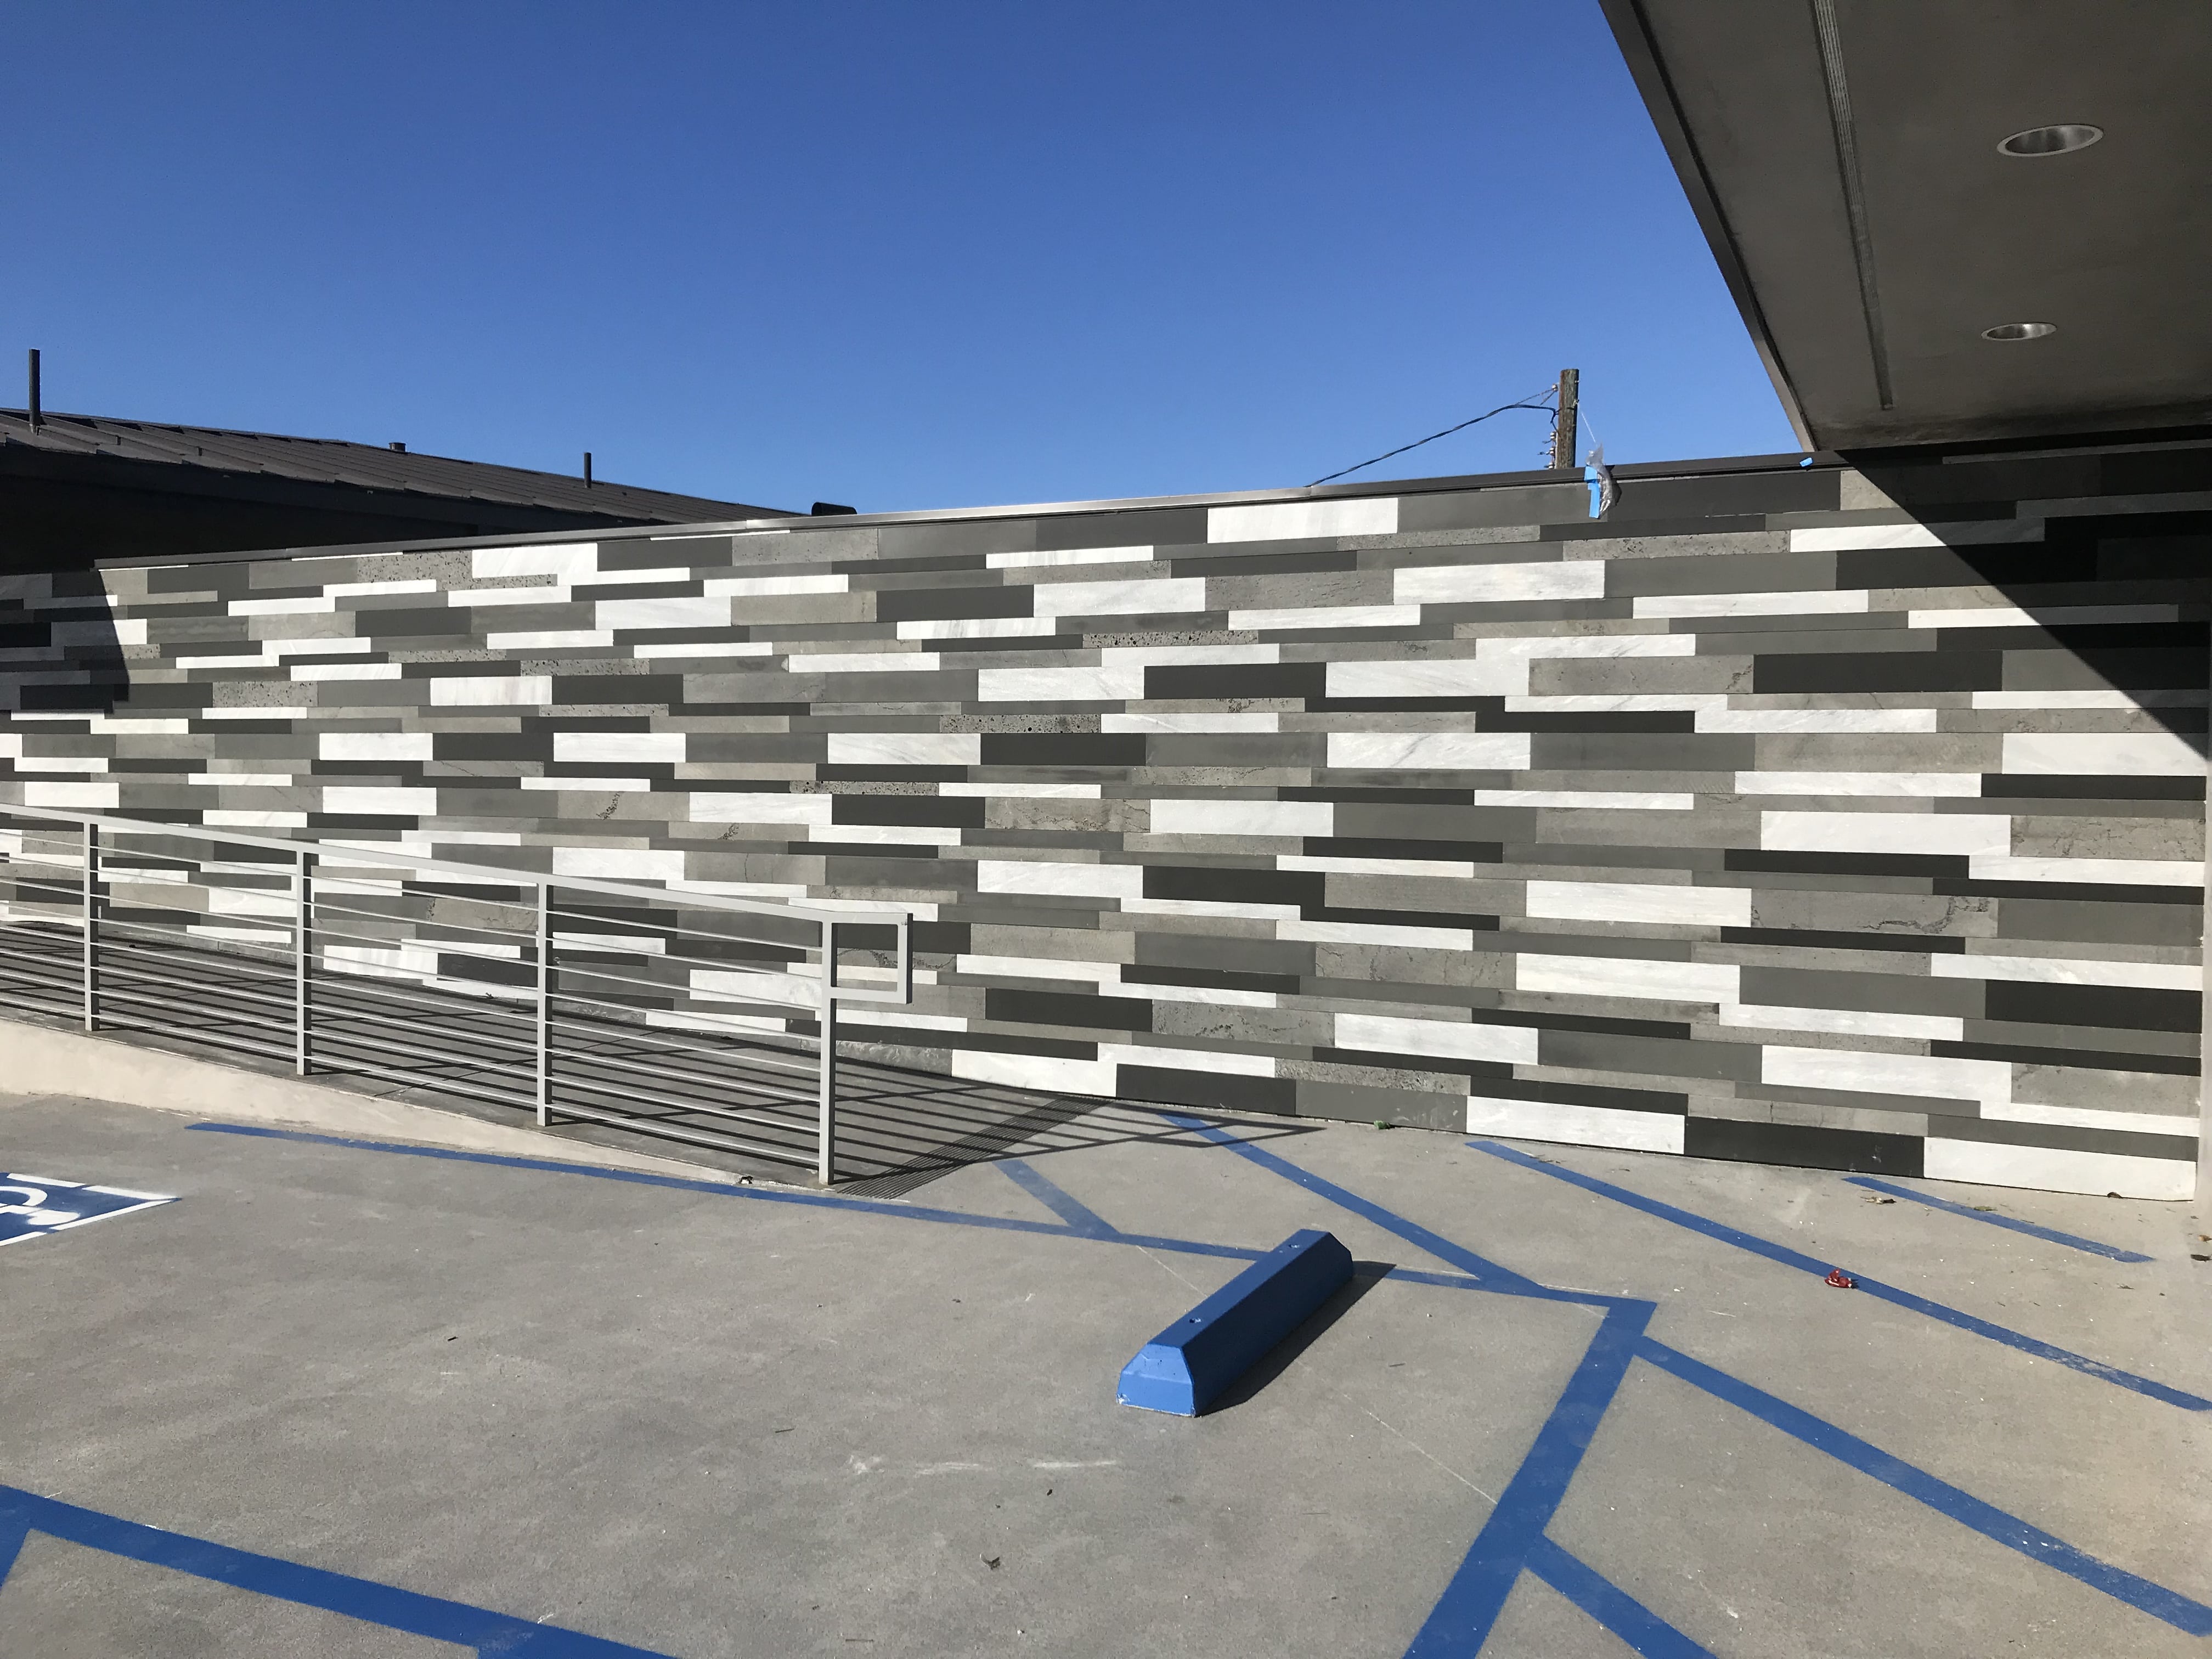 Commercial Exterior Feature Wall with four colors of Norstone Planc Large Format Tile mixed together in a random pattern